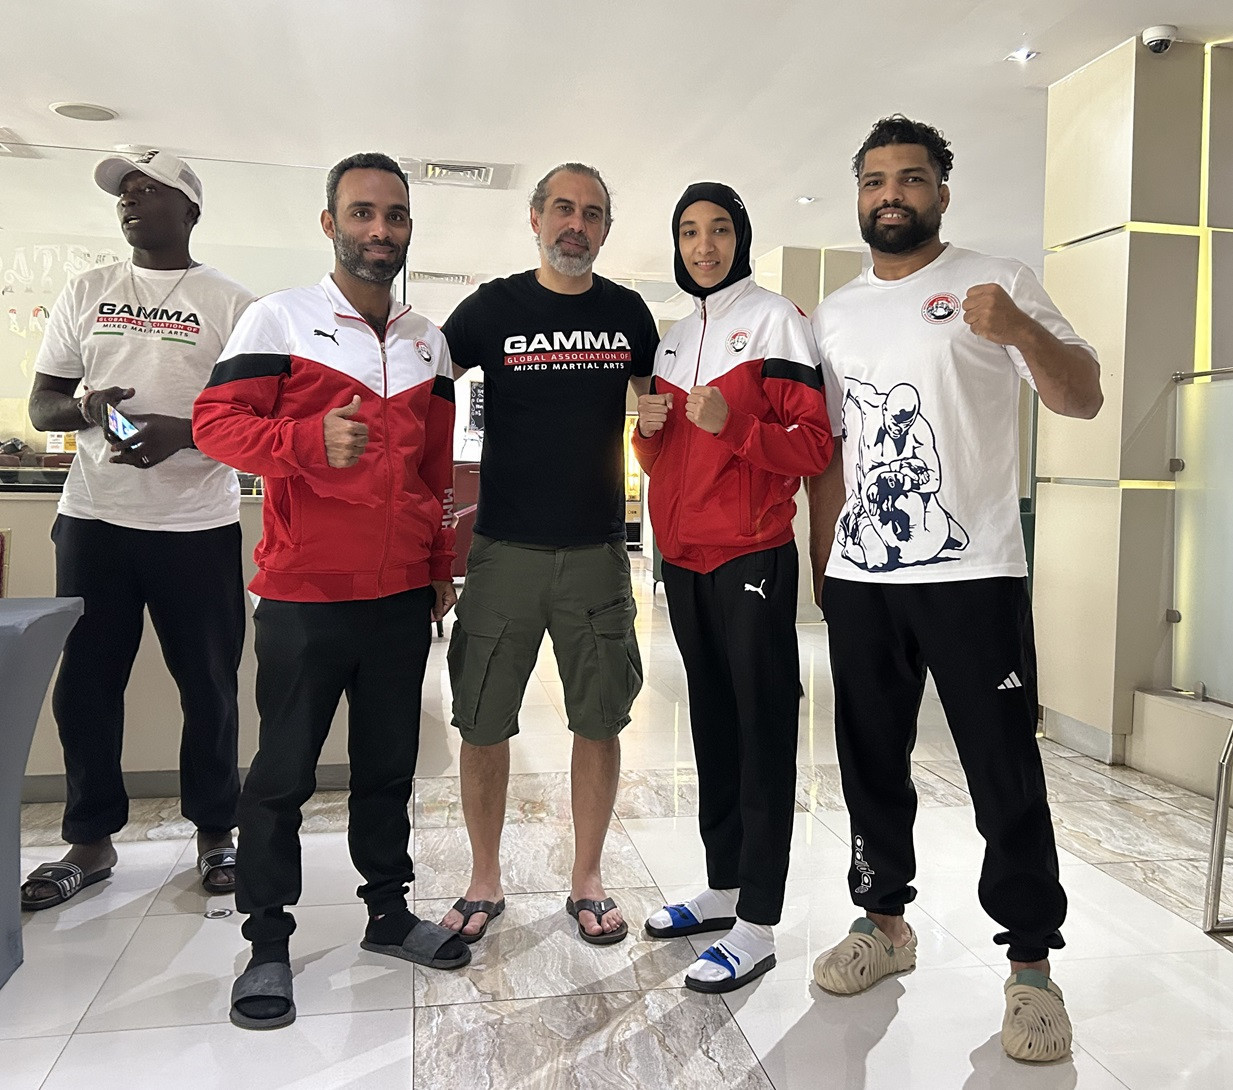 Egypt's national MMA team is preparing for the African Games. GAMMA